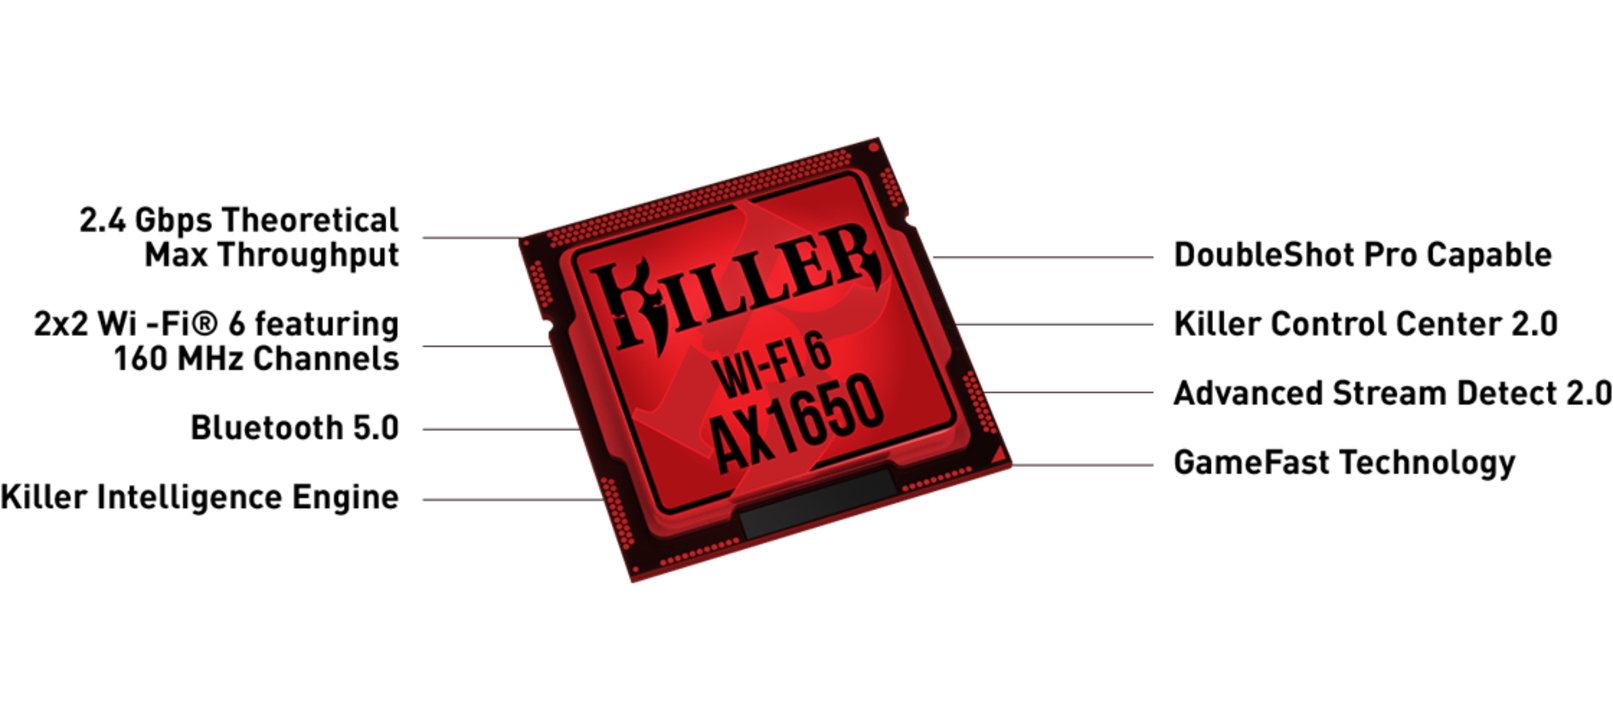 Good News For Online Gamers: Killer AX1650 Wi-Fi 6 Will Always Give You An Edge